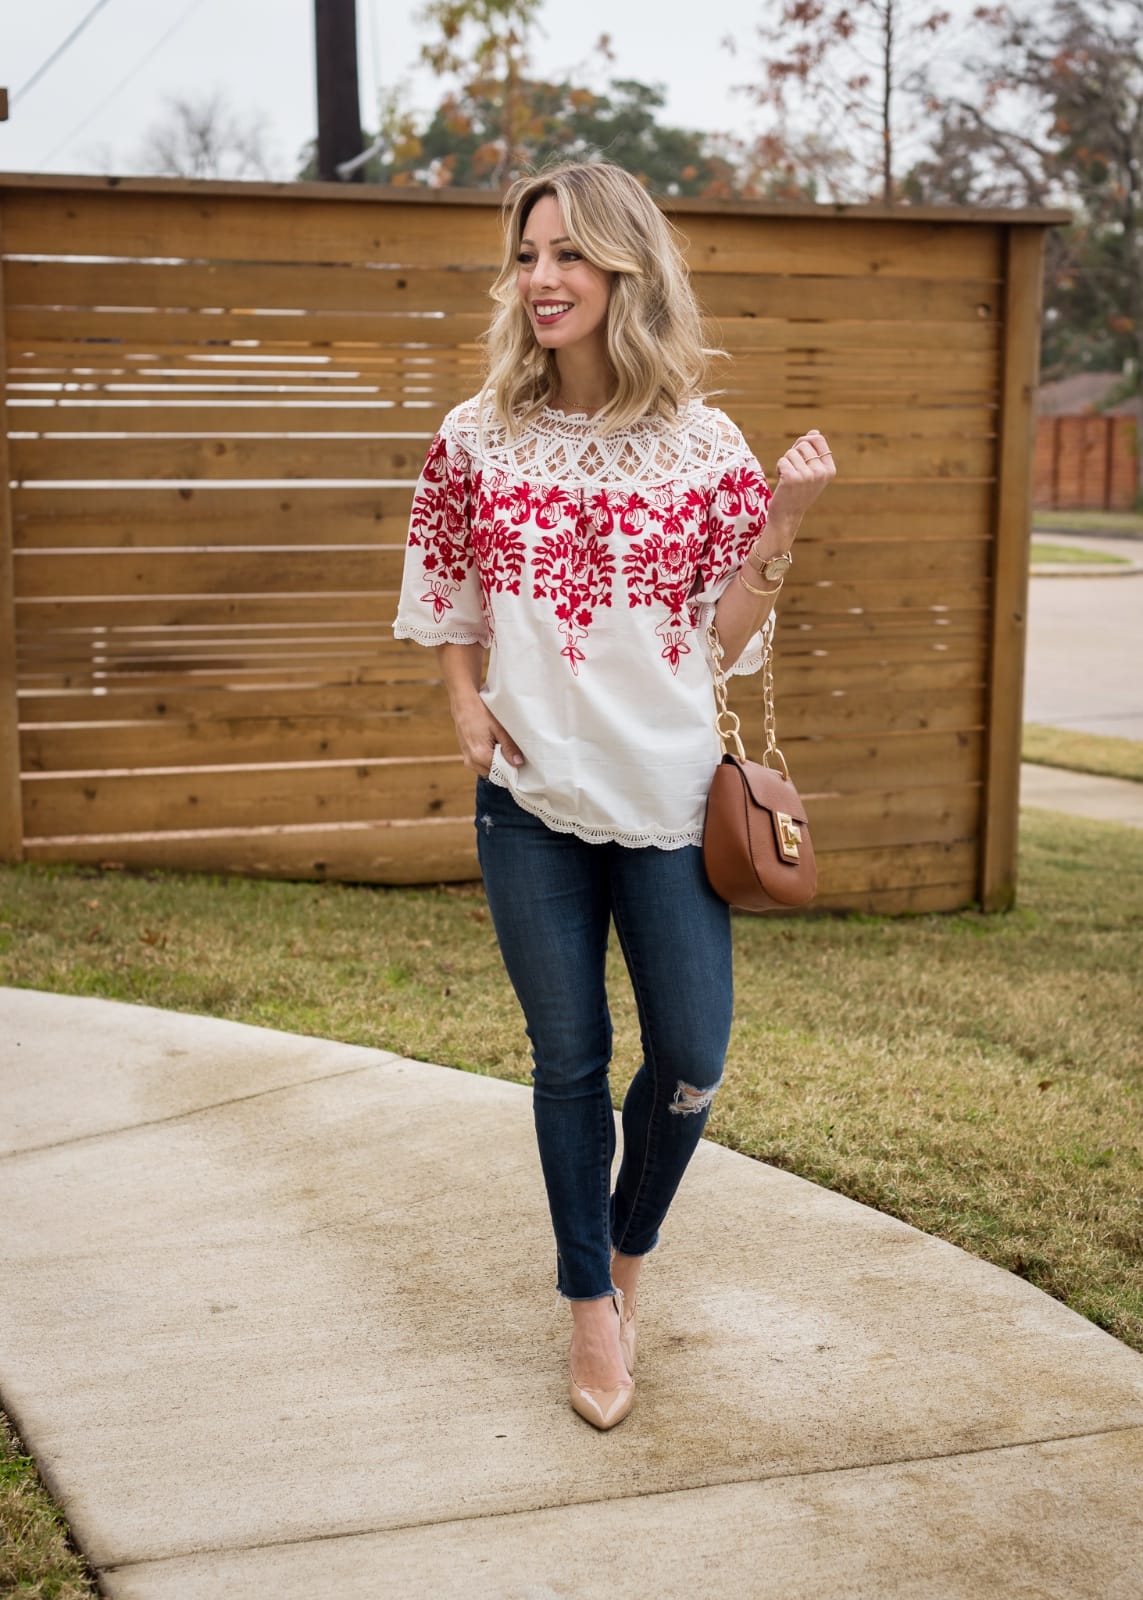 Amazon Fashion Prime Day Haul - Jeans and red and white embroidered top